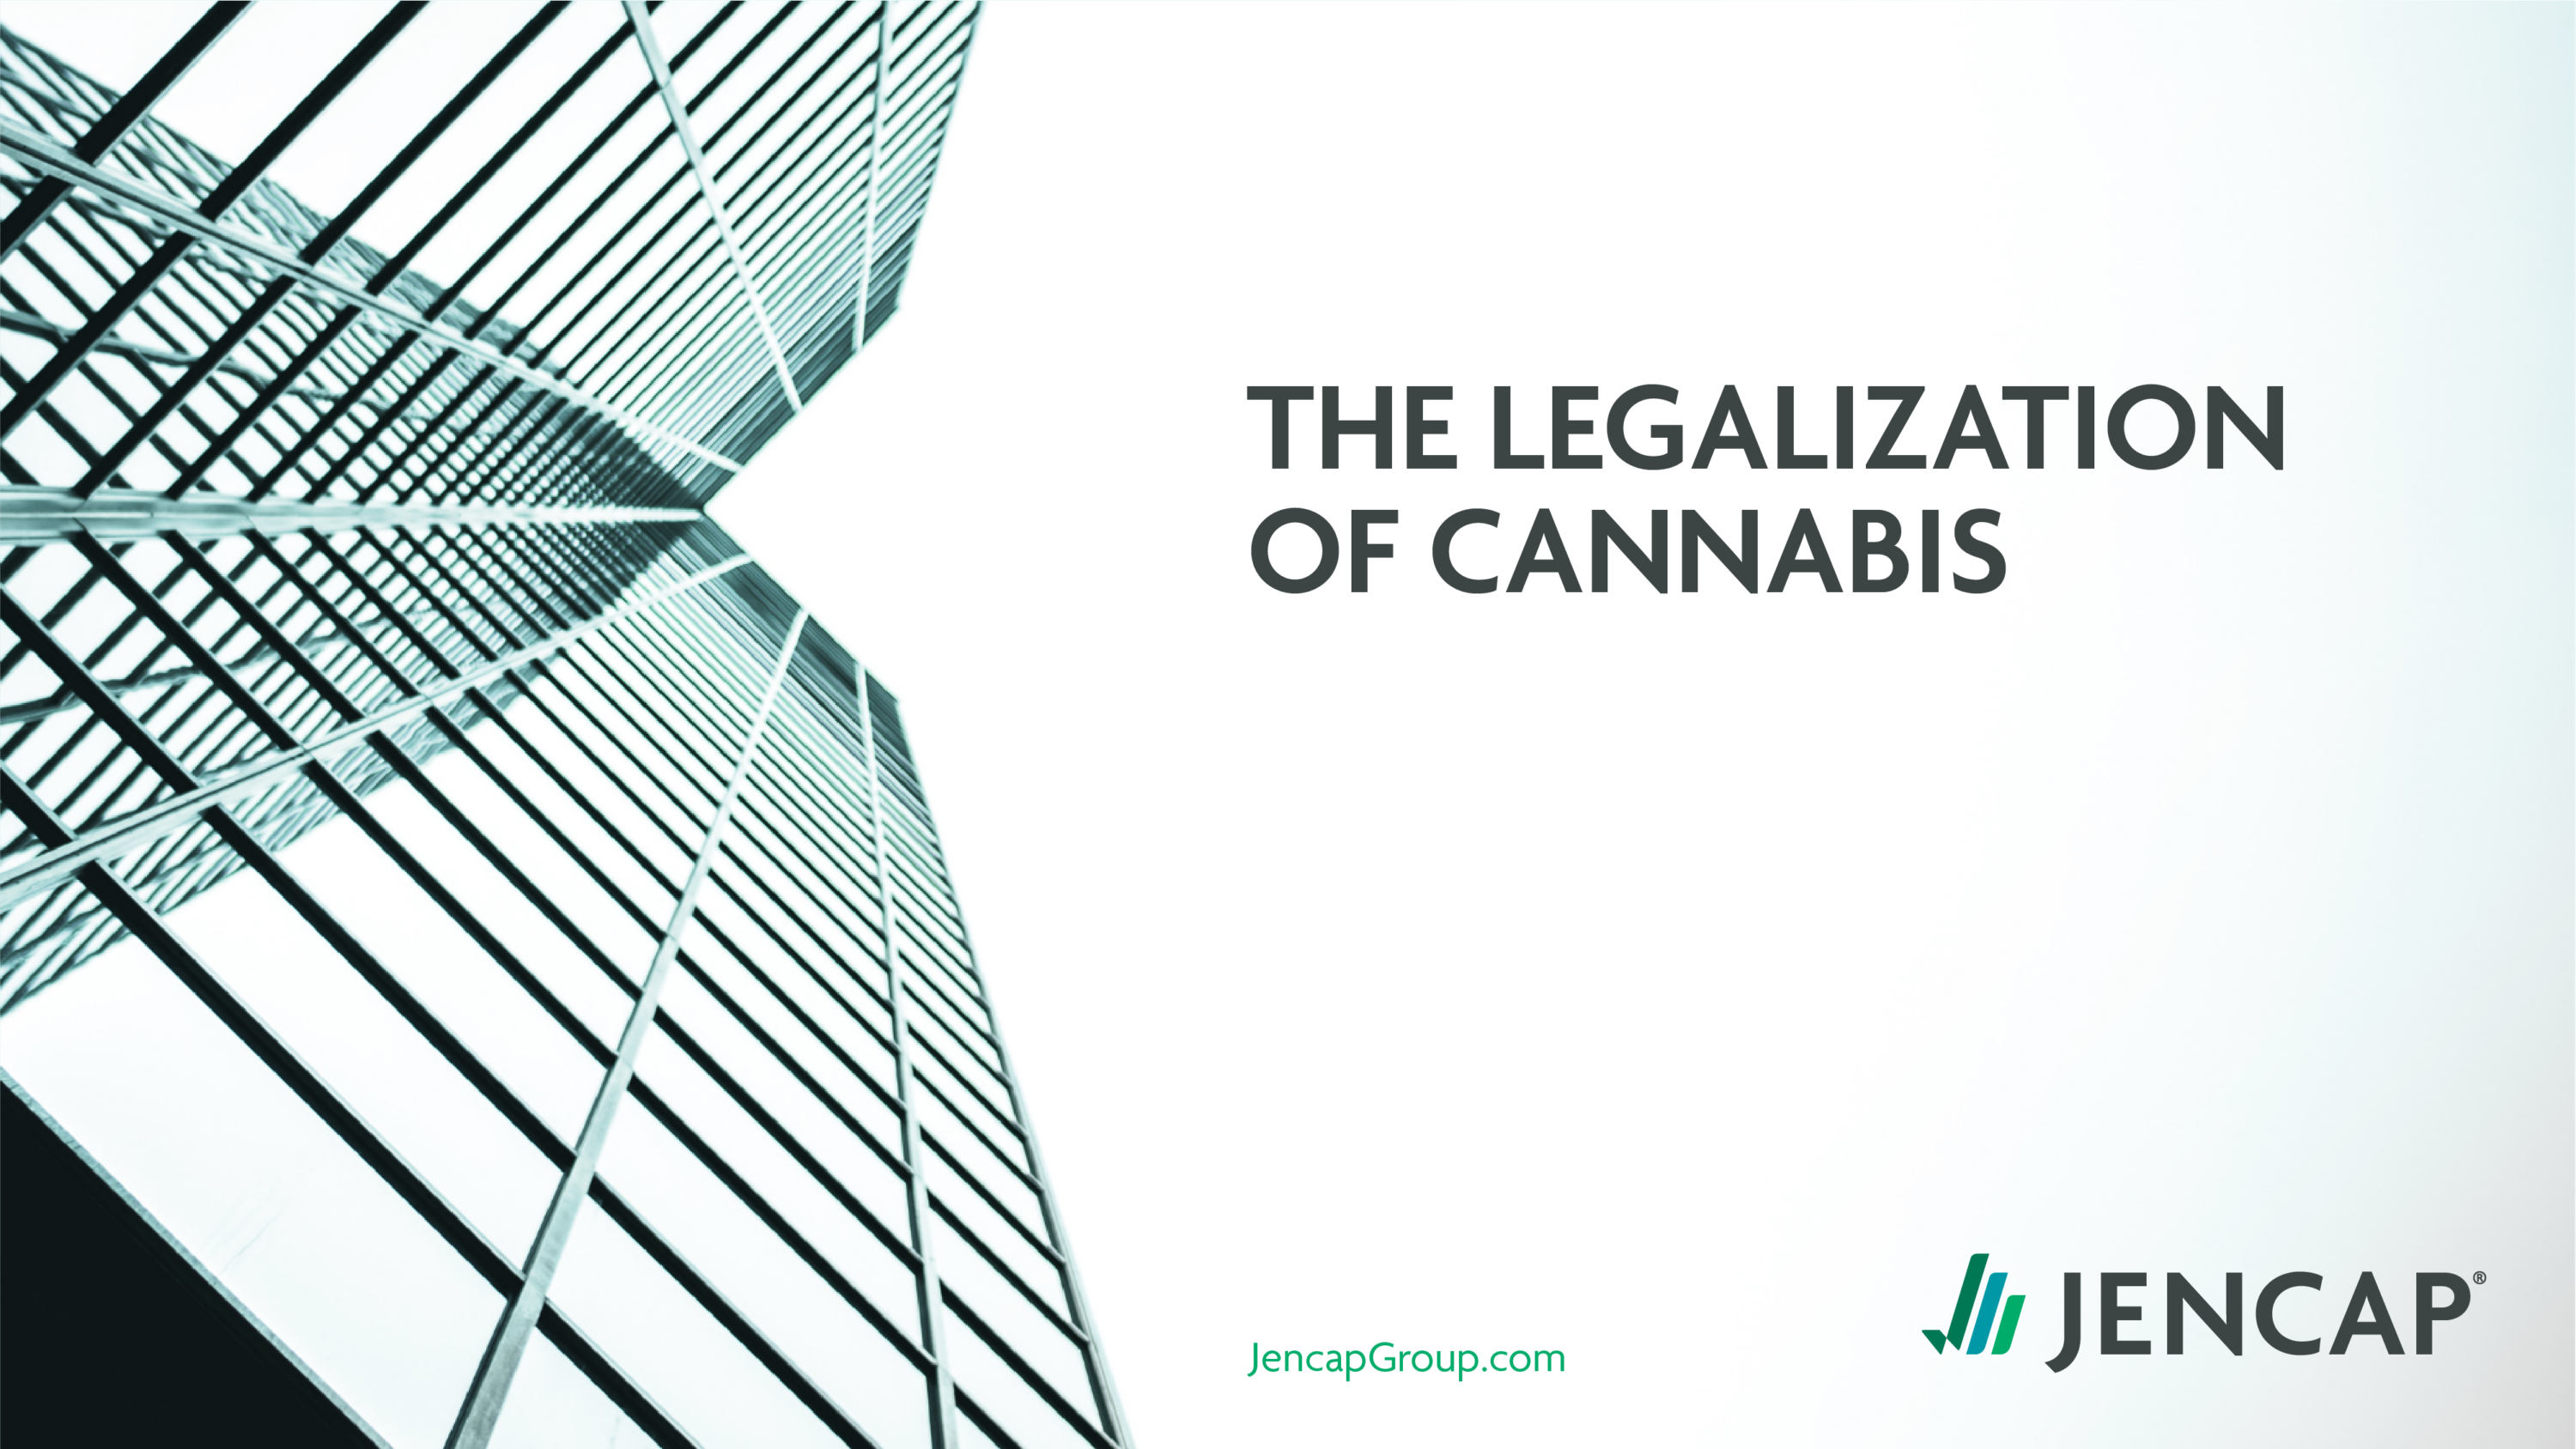 The Legalization of Cannabis